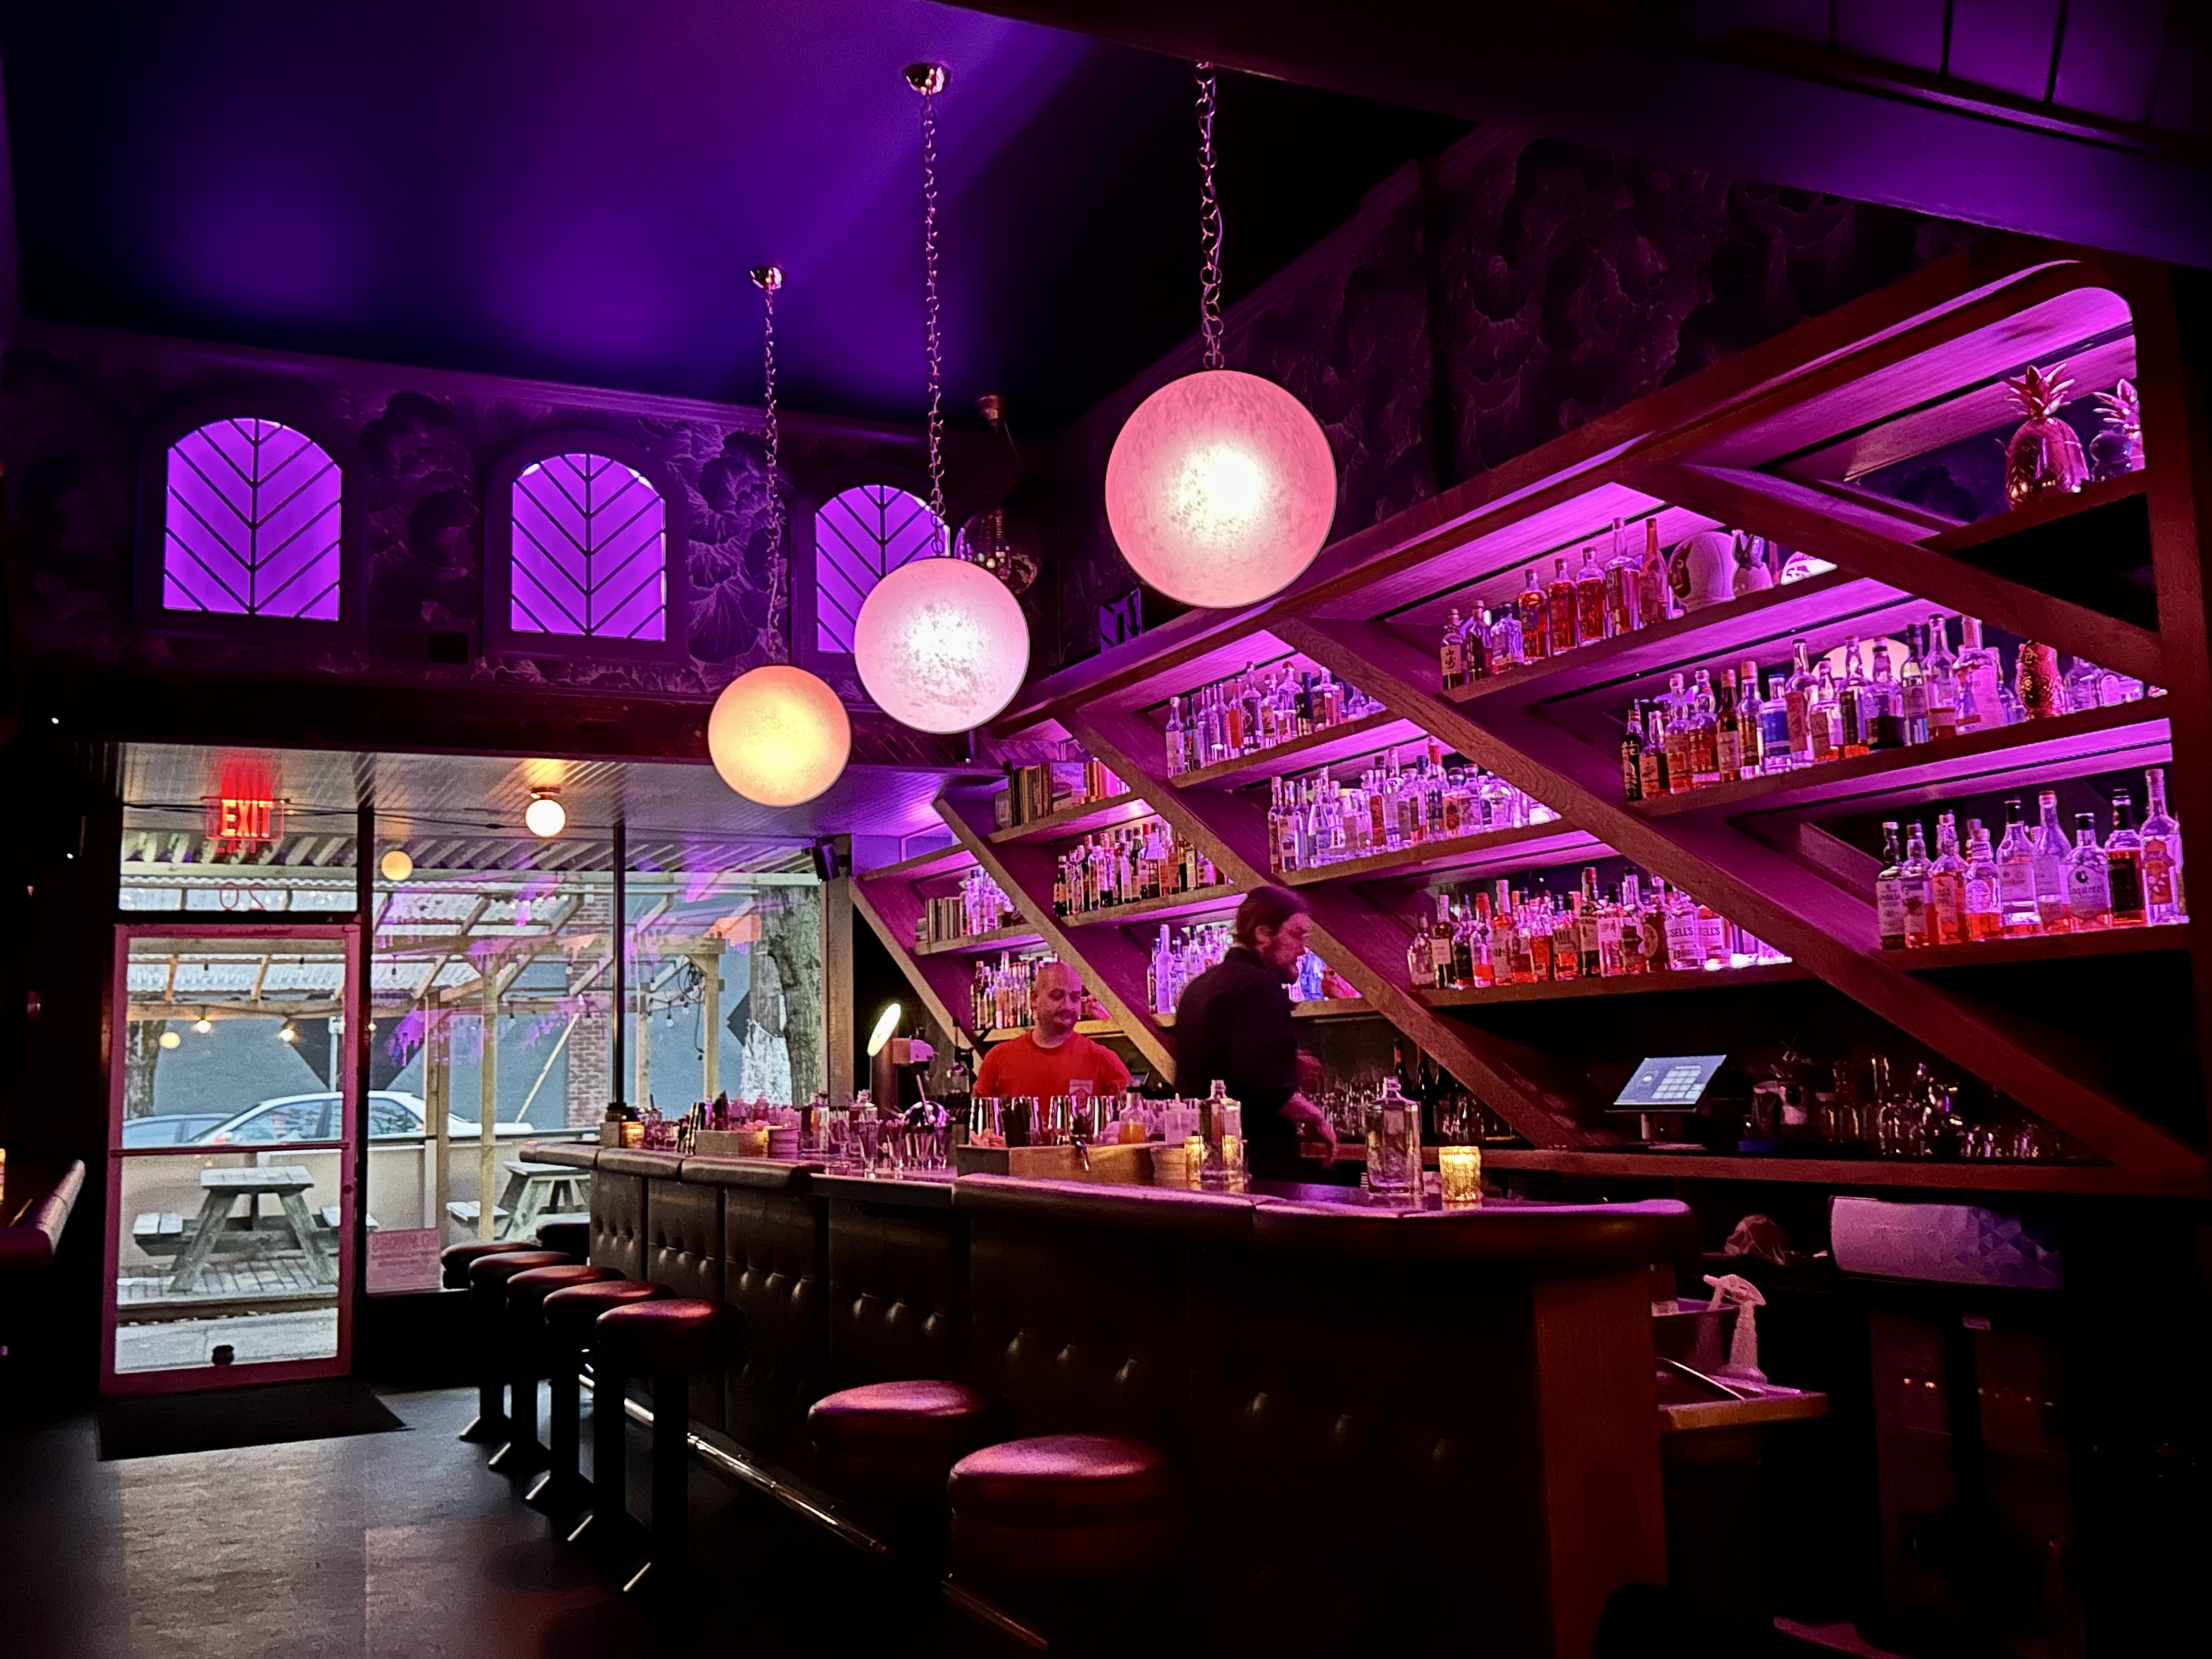 The interior of a bar with pink and purple lighting.